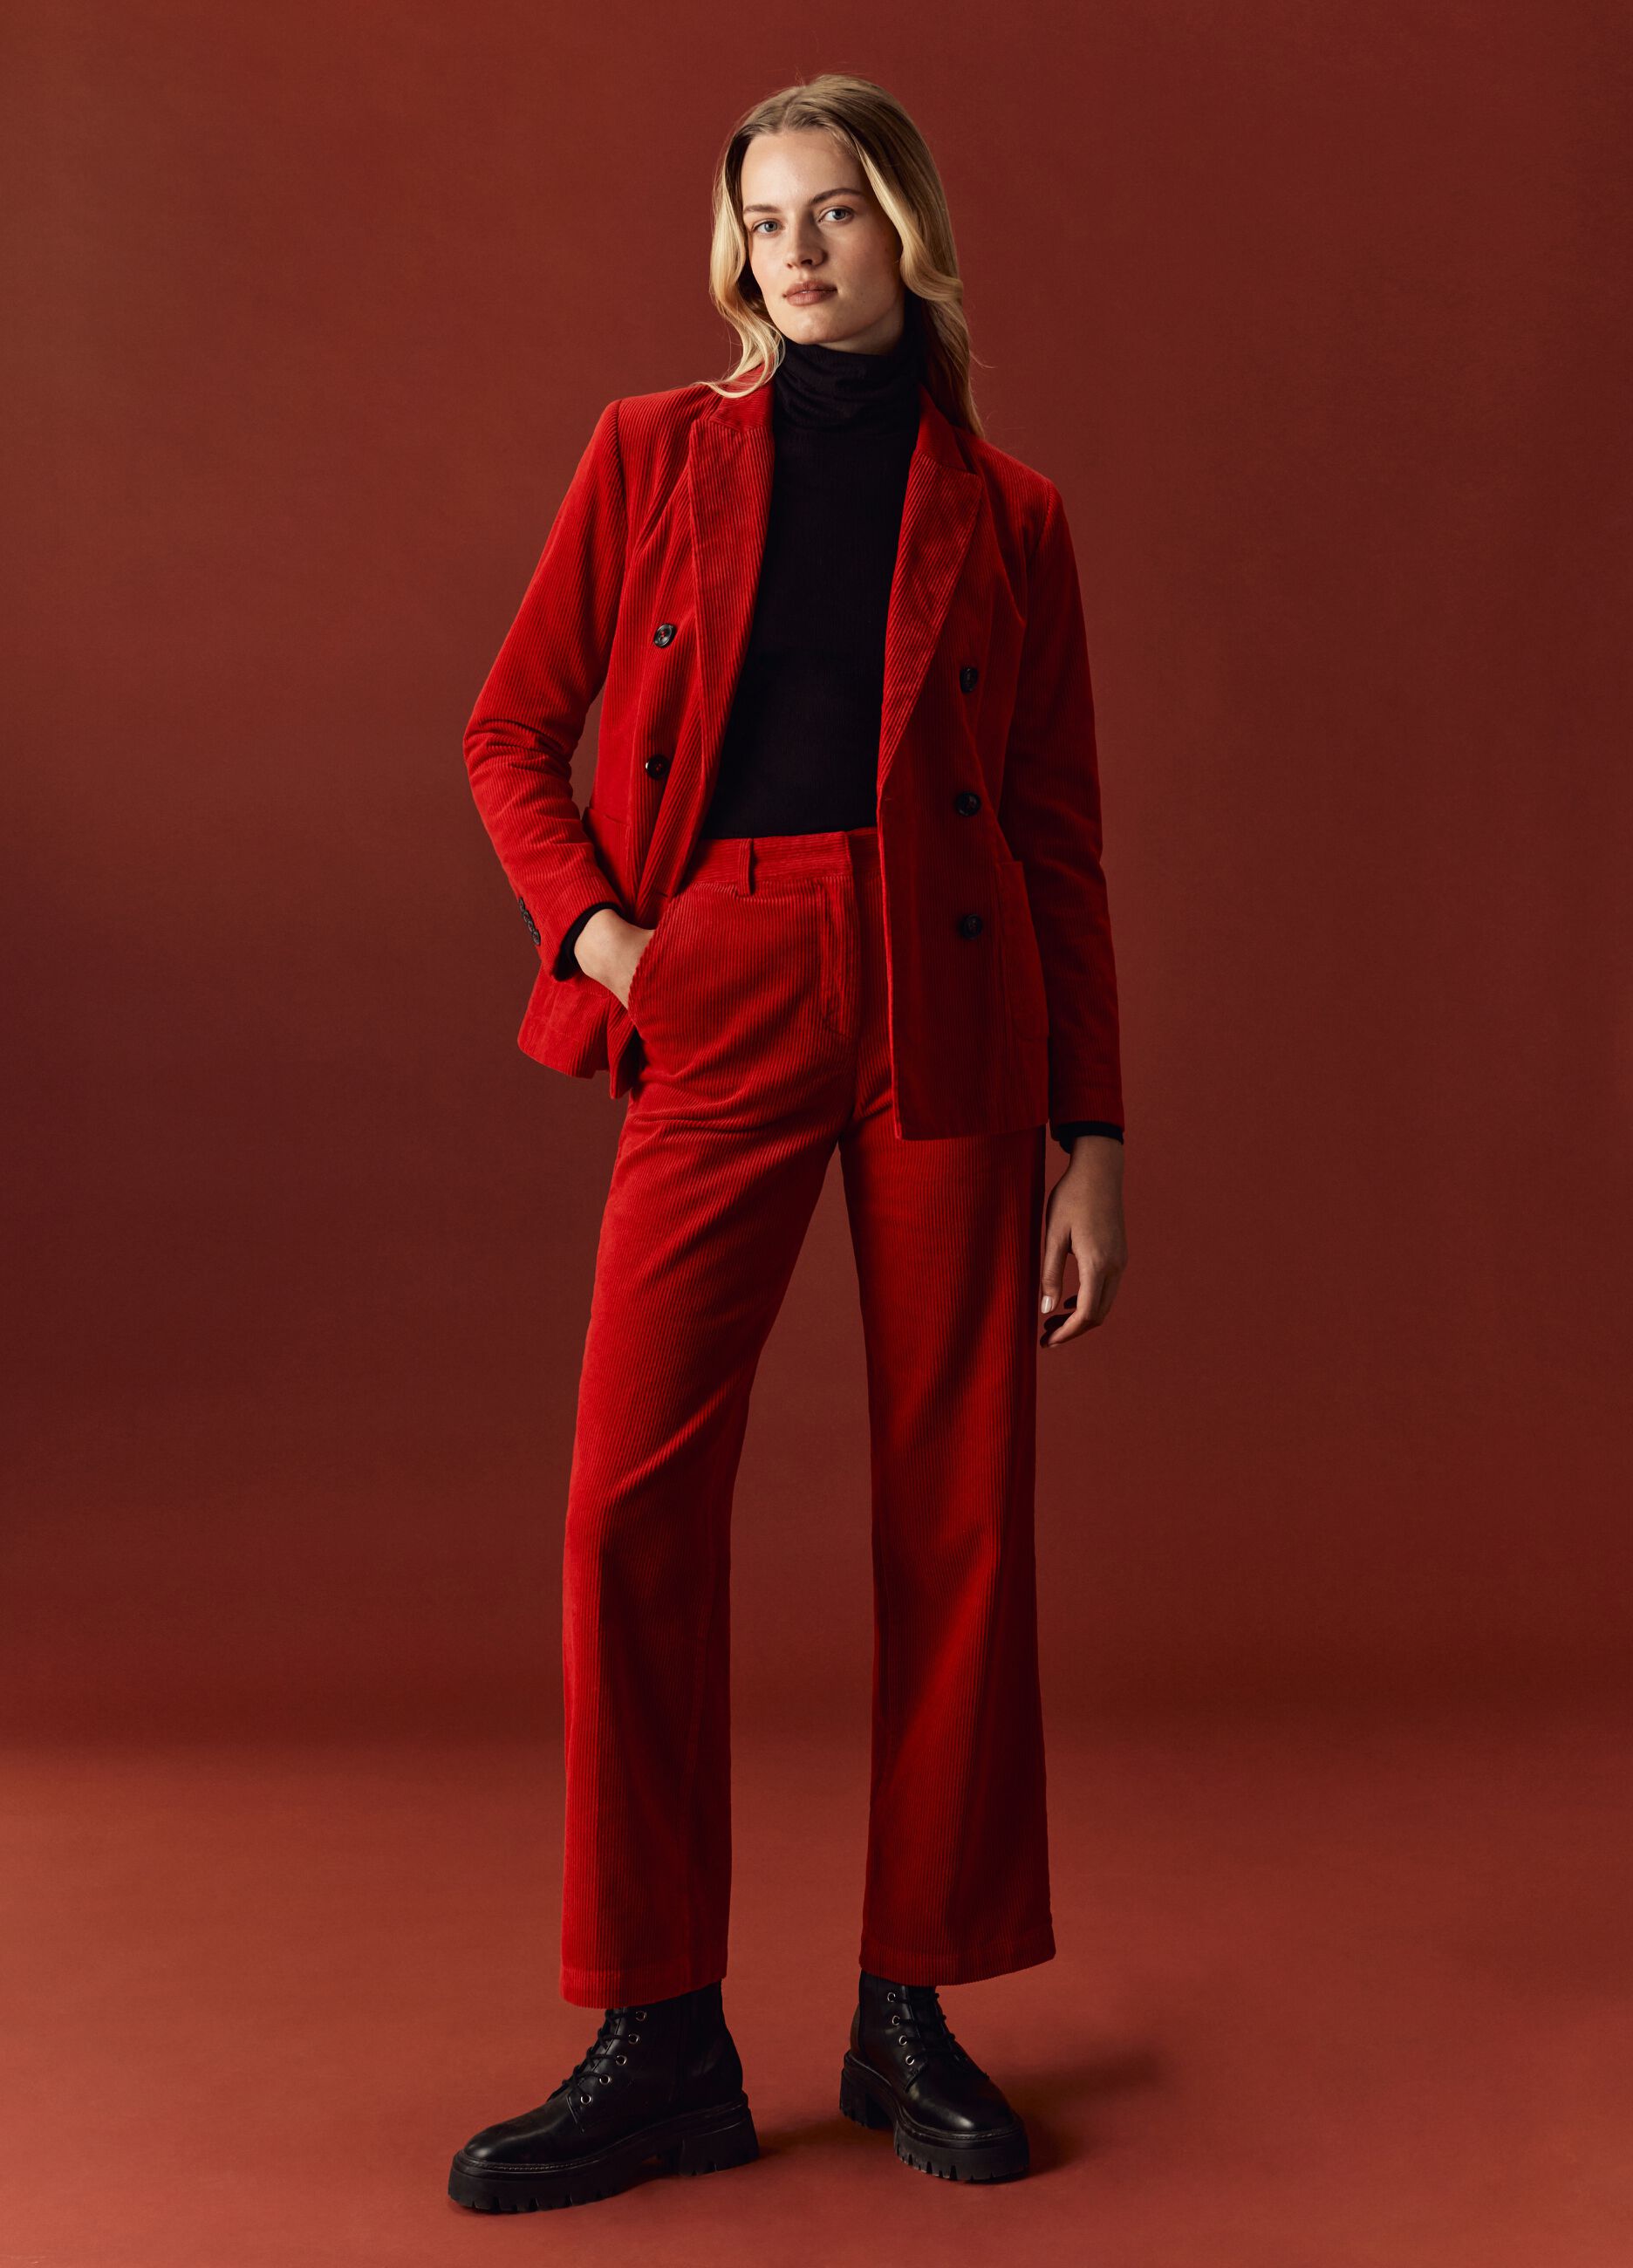 Corduroy Trousers - Red